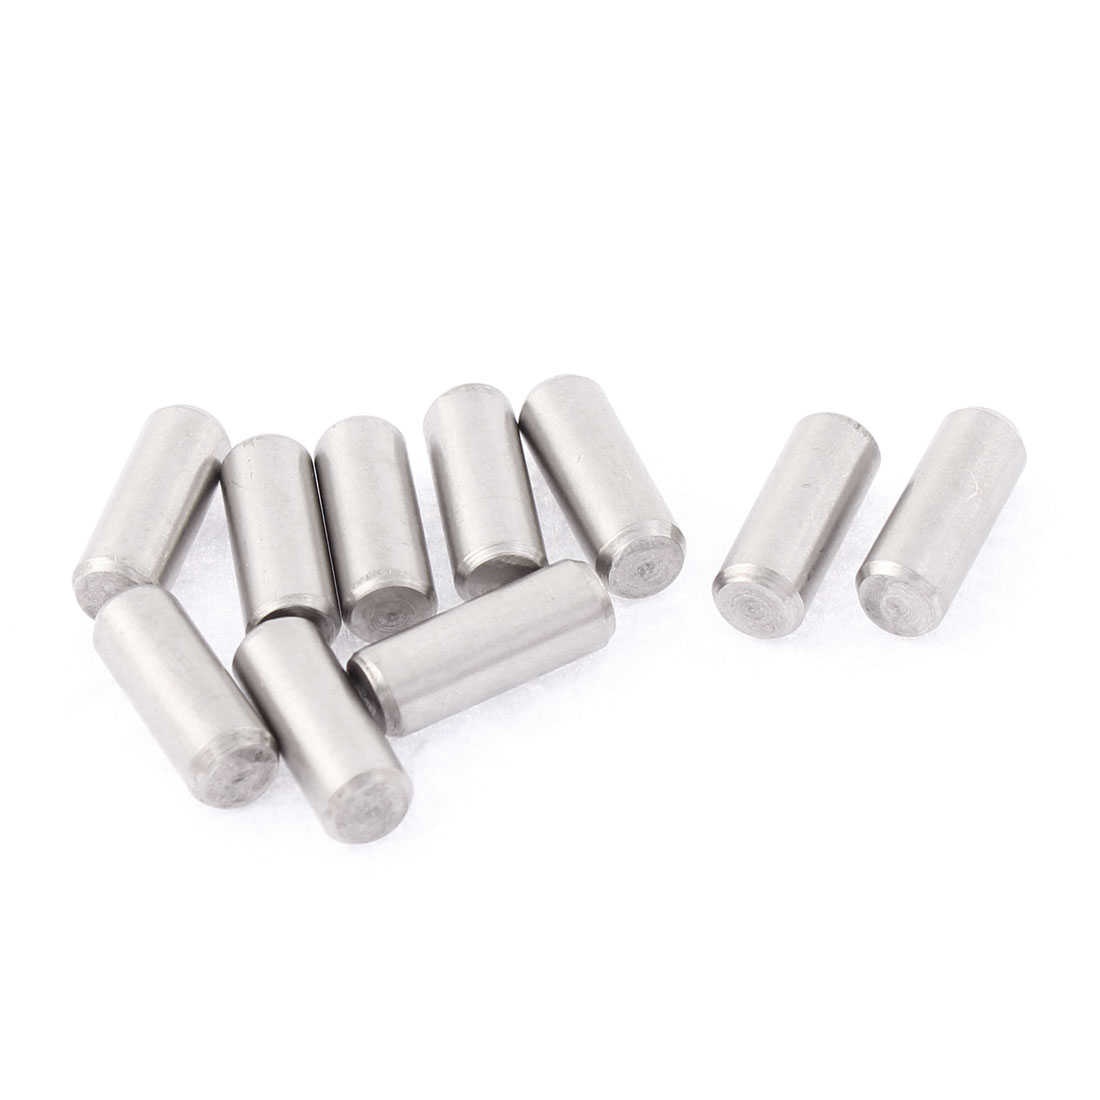 M6x16mm Stainless Steel Straight Retaining Dowel Pins Rod Fasten Elements 10 Pcs